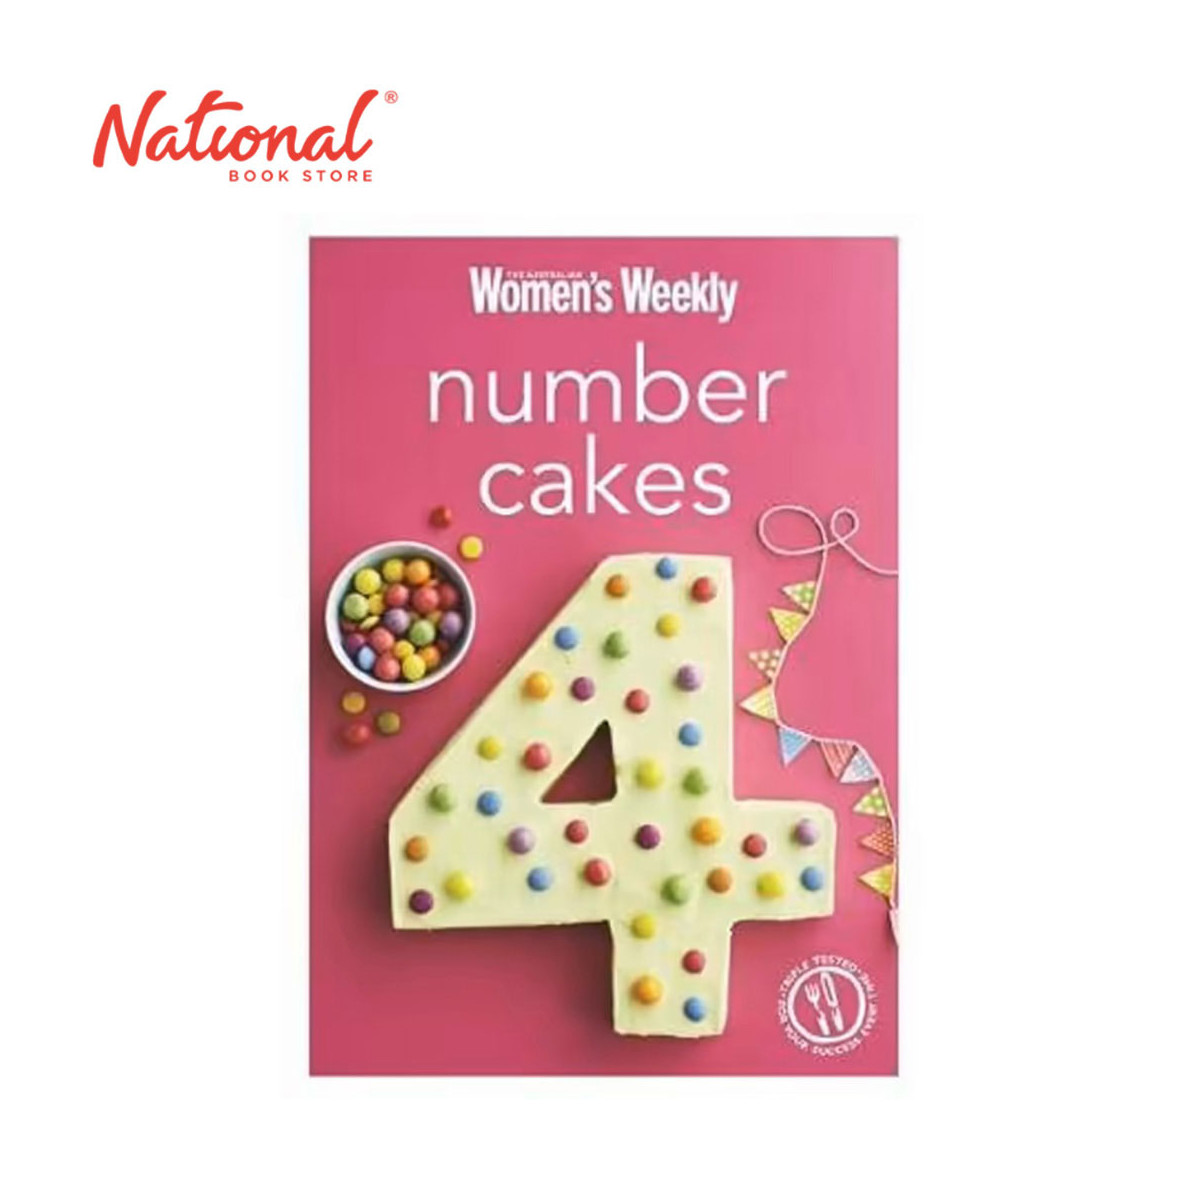 Number Cakes by The Australian Women's Weekly - Trade Paperback - Baking